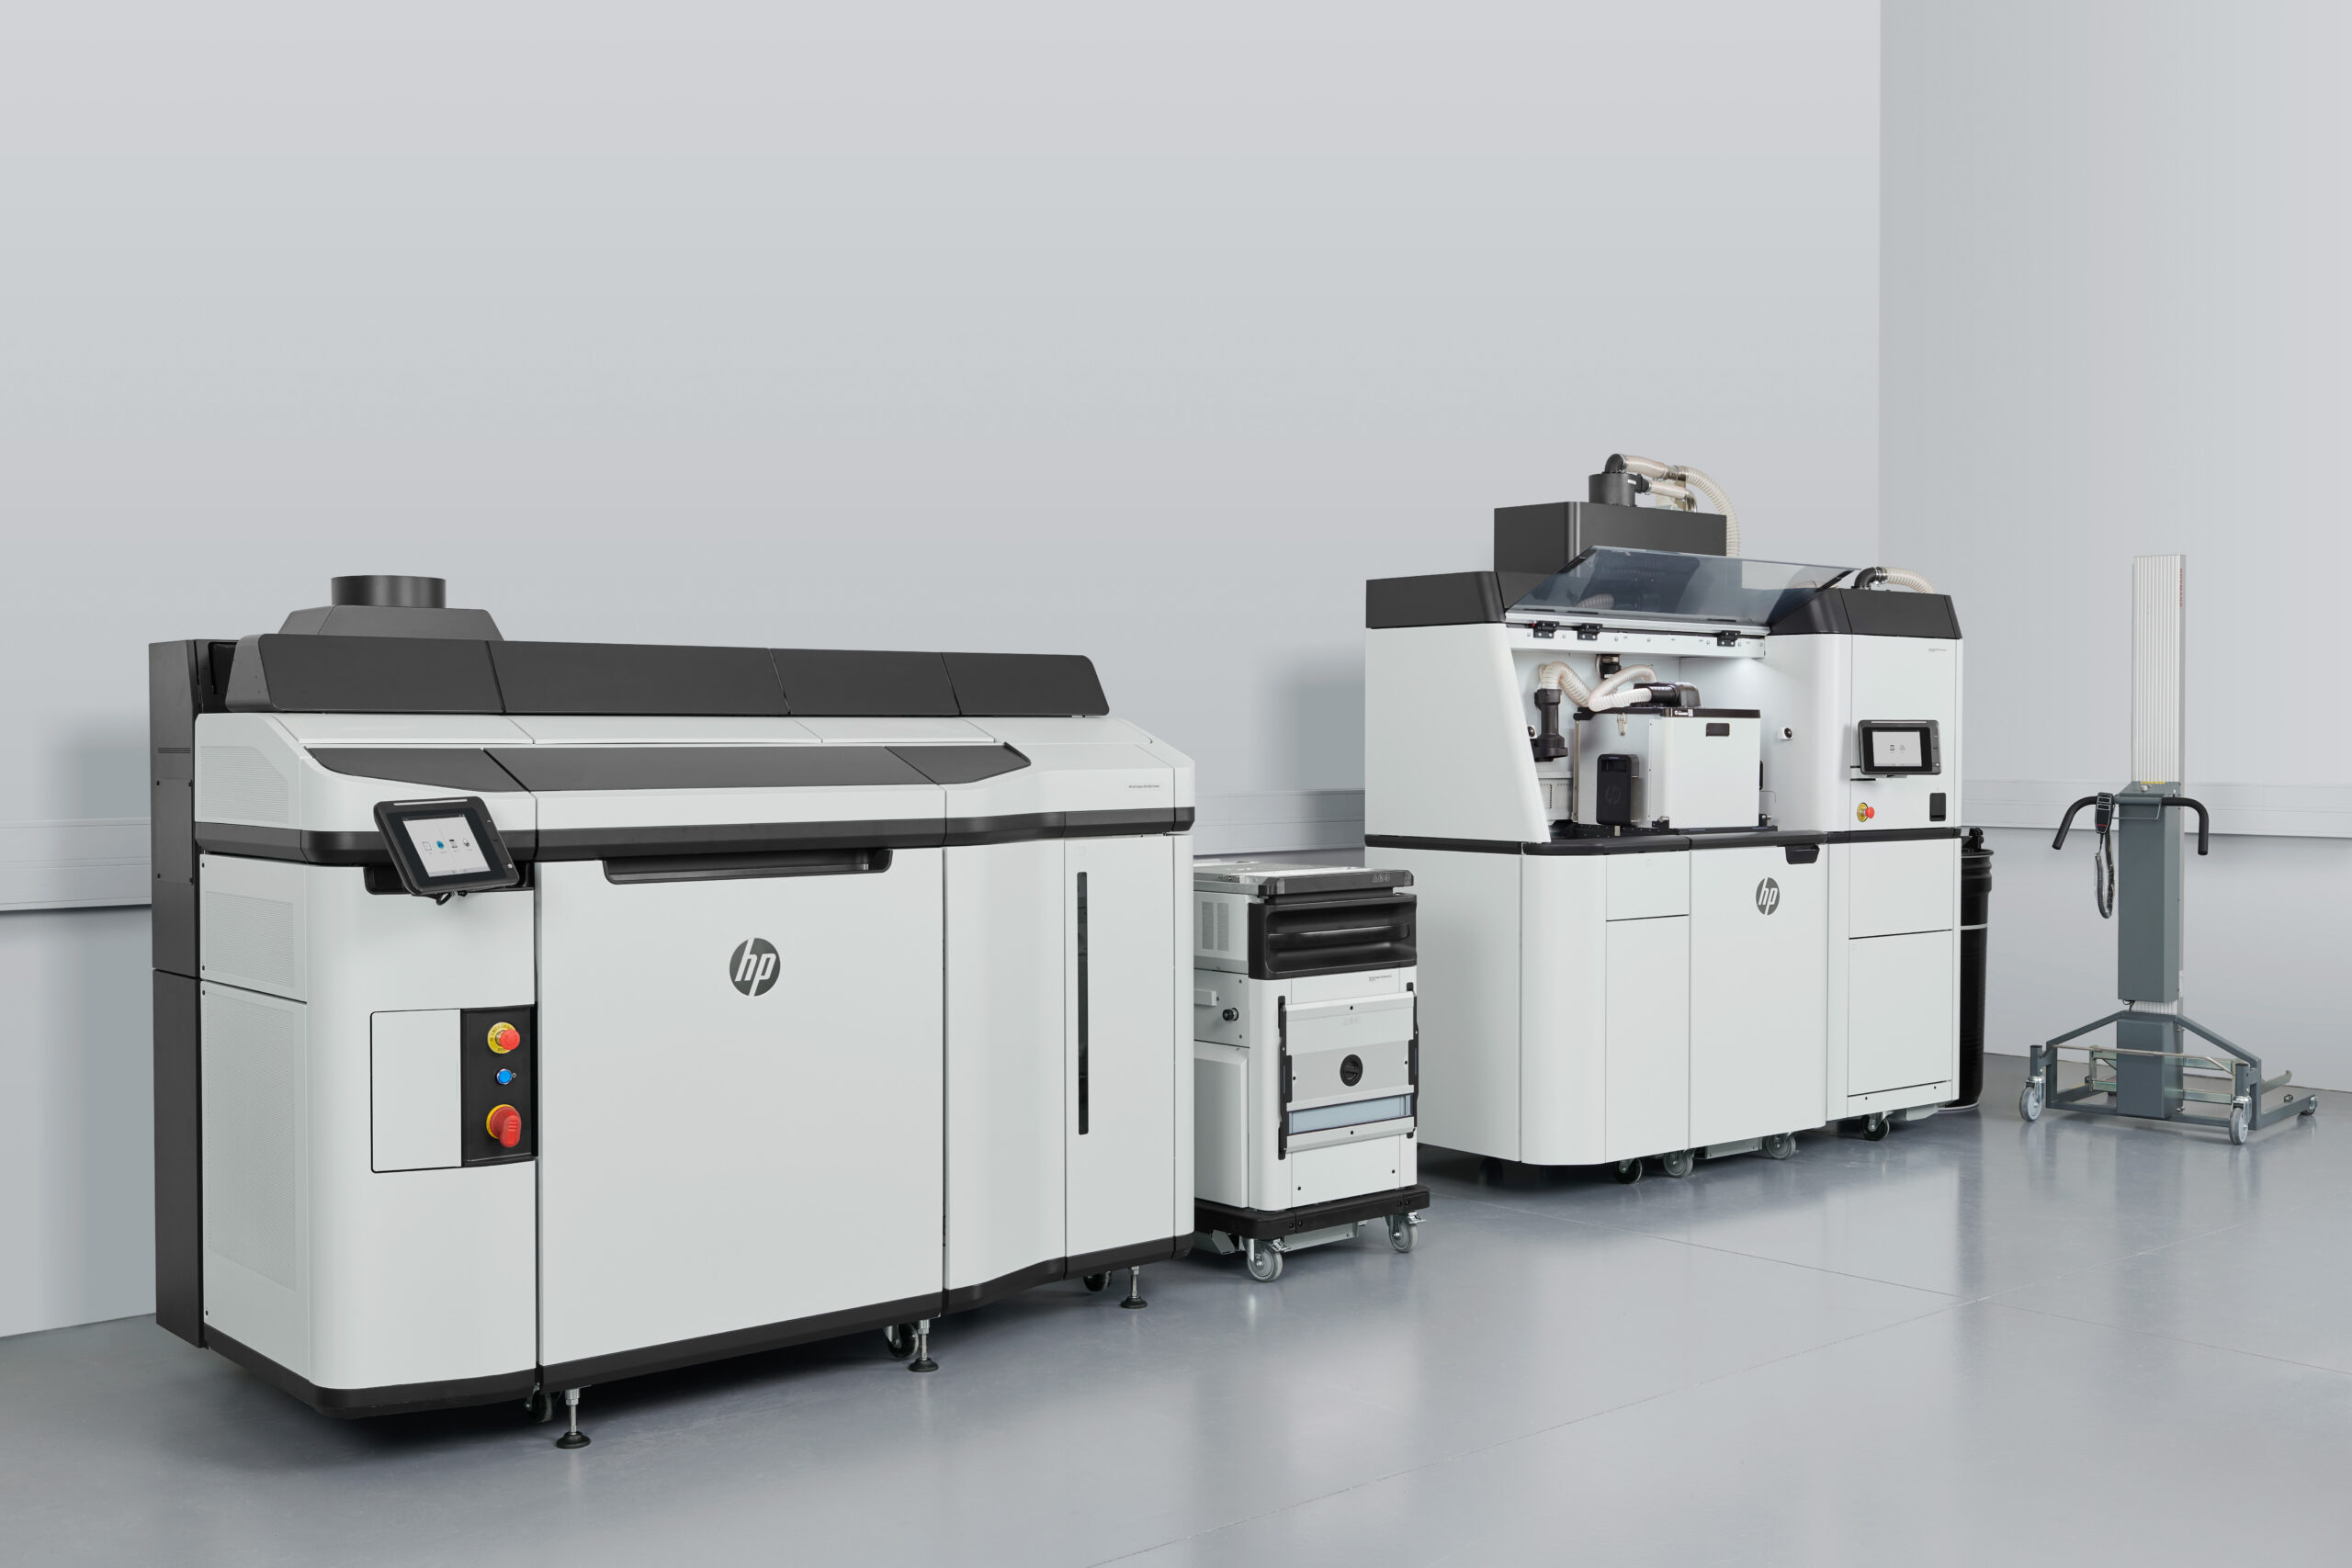 11.HP Jet Fusion 5200 Series 3D Printing Solutions - completo